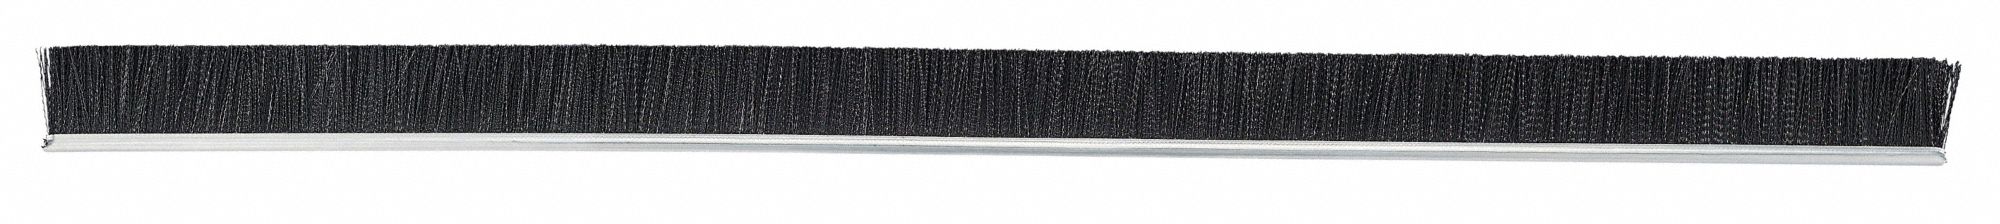 TANIS MB701836 Strip Brush,36 In L,Overall Trim 8 In